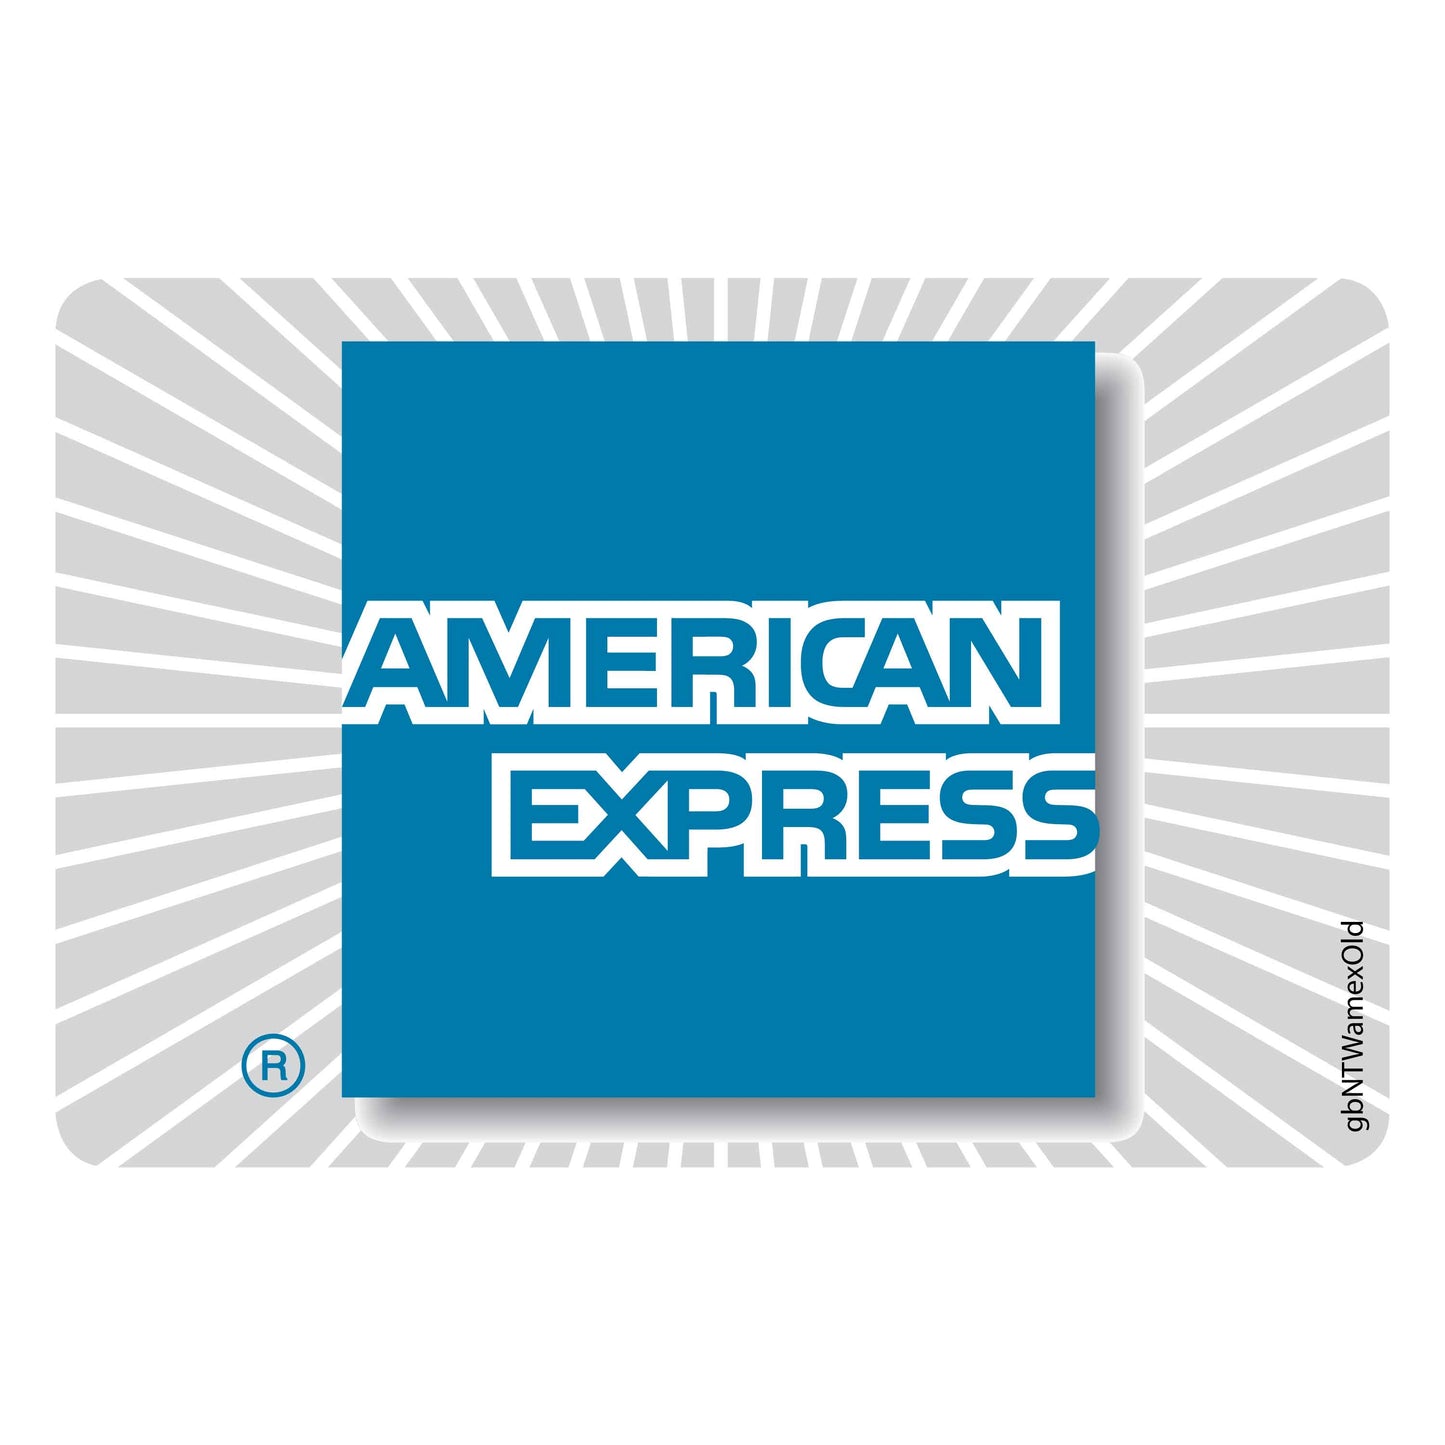 Single Network Decal, American Express. 3 inches by 2 inches in size.